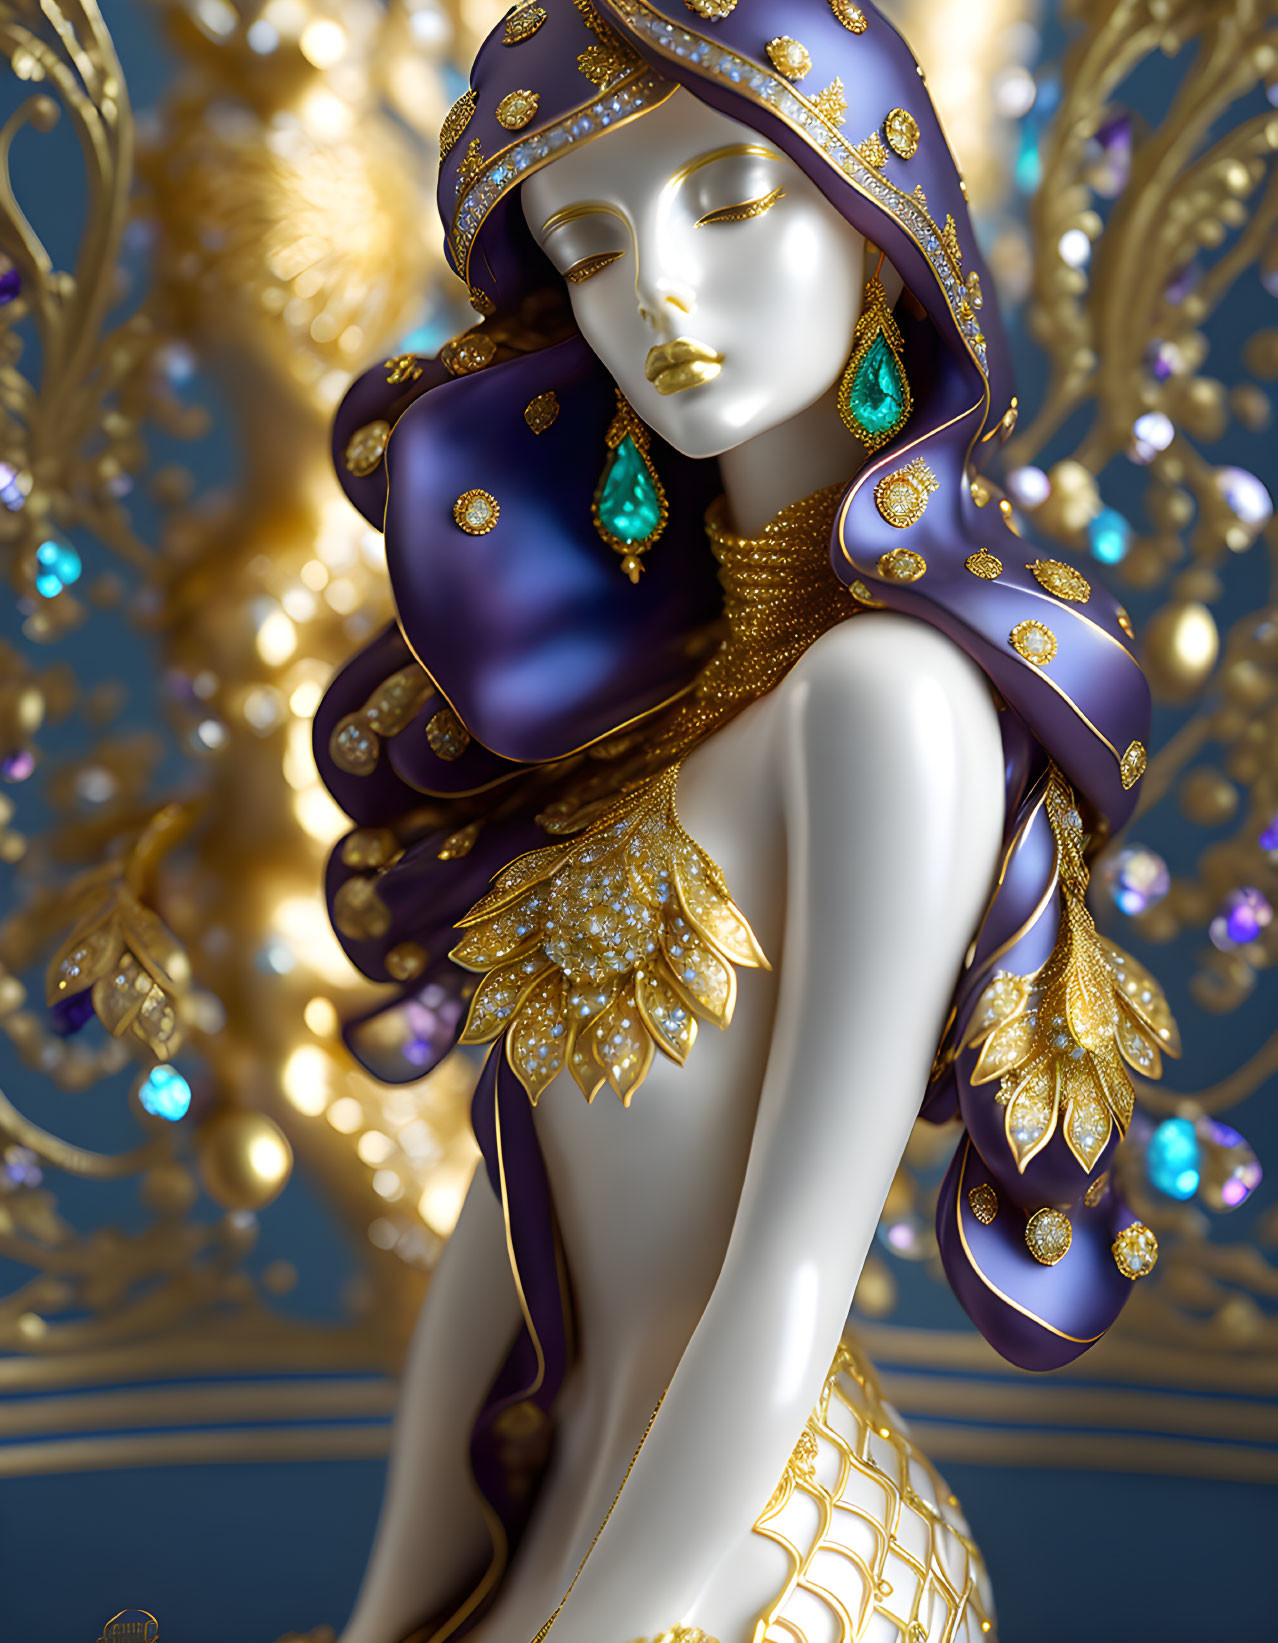 Golden-hued surreal artwork with elegant figure and ornate jewelry against decorative backdrop